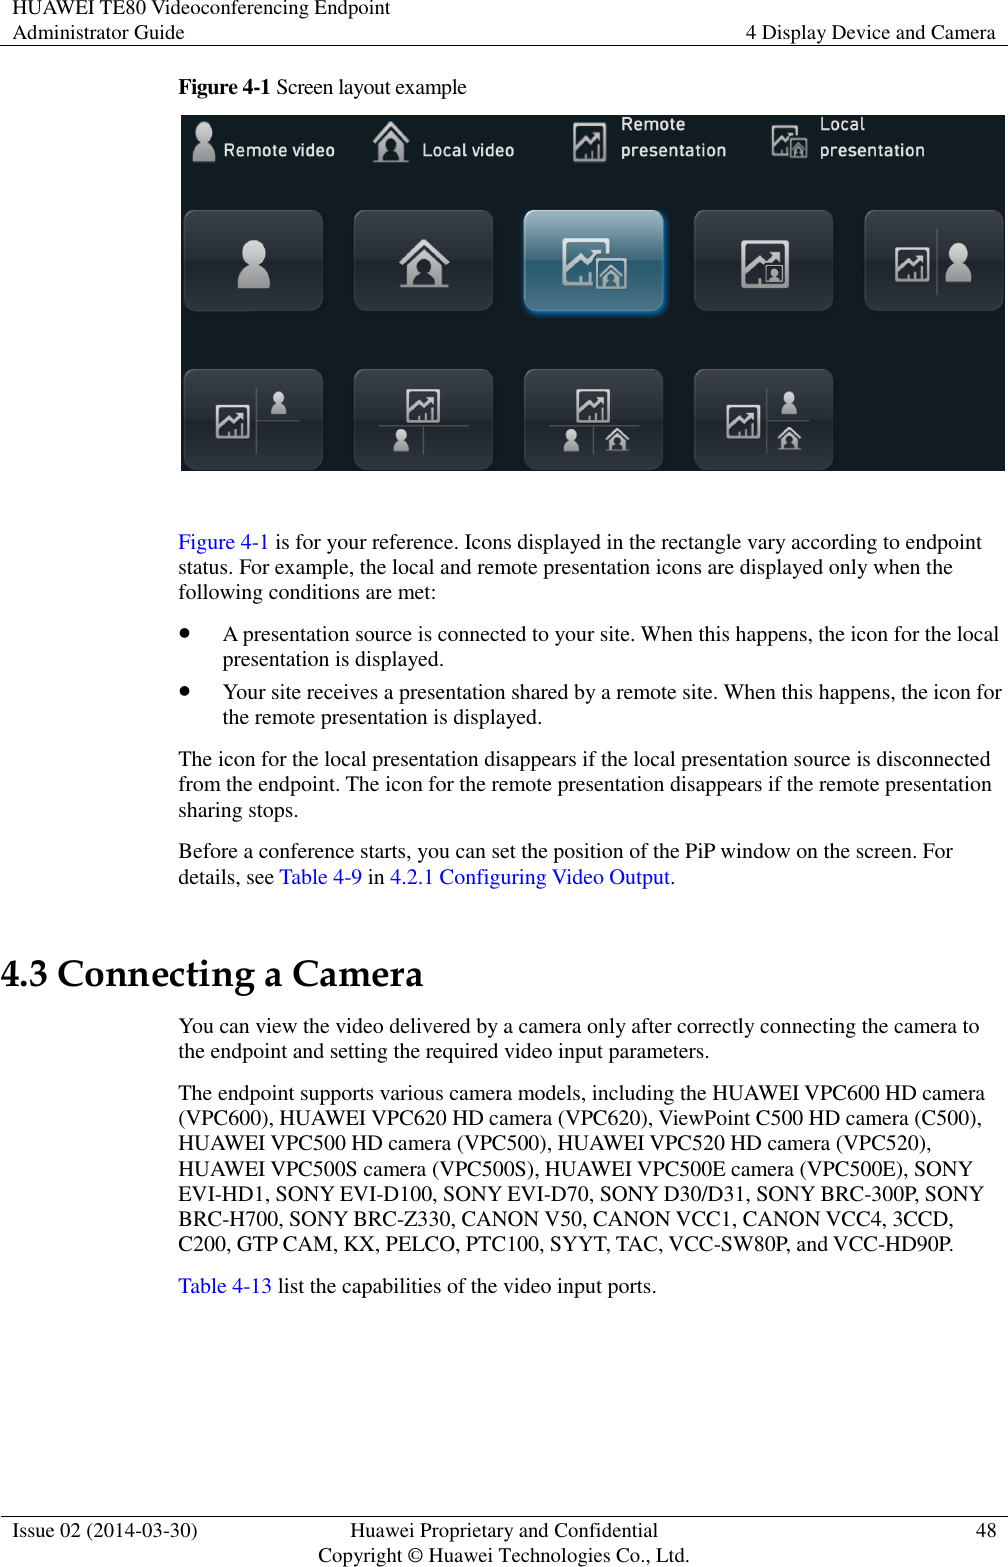 HUAWEI TE80 Videoconferencing Endpoint Administrator Guide 4 Display Device and Camera  Issue 02 (2014-03-30) Huawei Proprietary and Confidential Copyright © Huawei Technologies Co., Ltd. 48  Figure 4-1 Screen layout example   Figure 4-1 is for your reference. Icons displayed in the rectangle vary according to endpoint status. For example, the local and remote presentation icons are displayed only when the following conditions are met:  A presentation source is connected to your site. When this happens, the icon for the local presentation is displayed.  Your site receives a presentation shared by a remote site. When this happens, the icon for the remote presentation is displayed. The icon for the local presentation disappears if the local presentation source is disconnected from the endpoint. The icon for the remote presentation disappears if the remote presentation sharing stops. Before a conference starts, you can set the position of the PiP window on the screen. For details, see Table 4-9 in 4.2.1 Configuring Video Output. 4.3 Connecting a Camera You can view the video delivered by a camera only after correctly connecting the camera to the endpoint and setting the required video input parameters. The endpoint supports various camera models, including the HUAWEI VPC600 HD camera (VPC600), HUAWEI VPC620 HD camera (VPC620), ViewPoint C500 HD camera (C500), HUAWEI VPC500 HD camera (VPC500), HUAWEI VPC520 HD camera (VPC520), HUAWEI VPC500S camera (VPC500S), HUAWEI VPC500E camera (VPC500E), SONY EVI-HD1, SONY EVI-D100, SONY EVI-D70, SONY D30/D31, SONY BRC-300P, SONY BRC-H700, SONY BRC-Z330, CANON V50, CANON VCC1, CANON VCC4, 3CCD, C200, GTP CAM, KX, PELCO, PTC100, SYYT, TAC, VCC-SW80P, and VCC-HD90P.   Table 4-13 list the capabilities of the video input ports. 